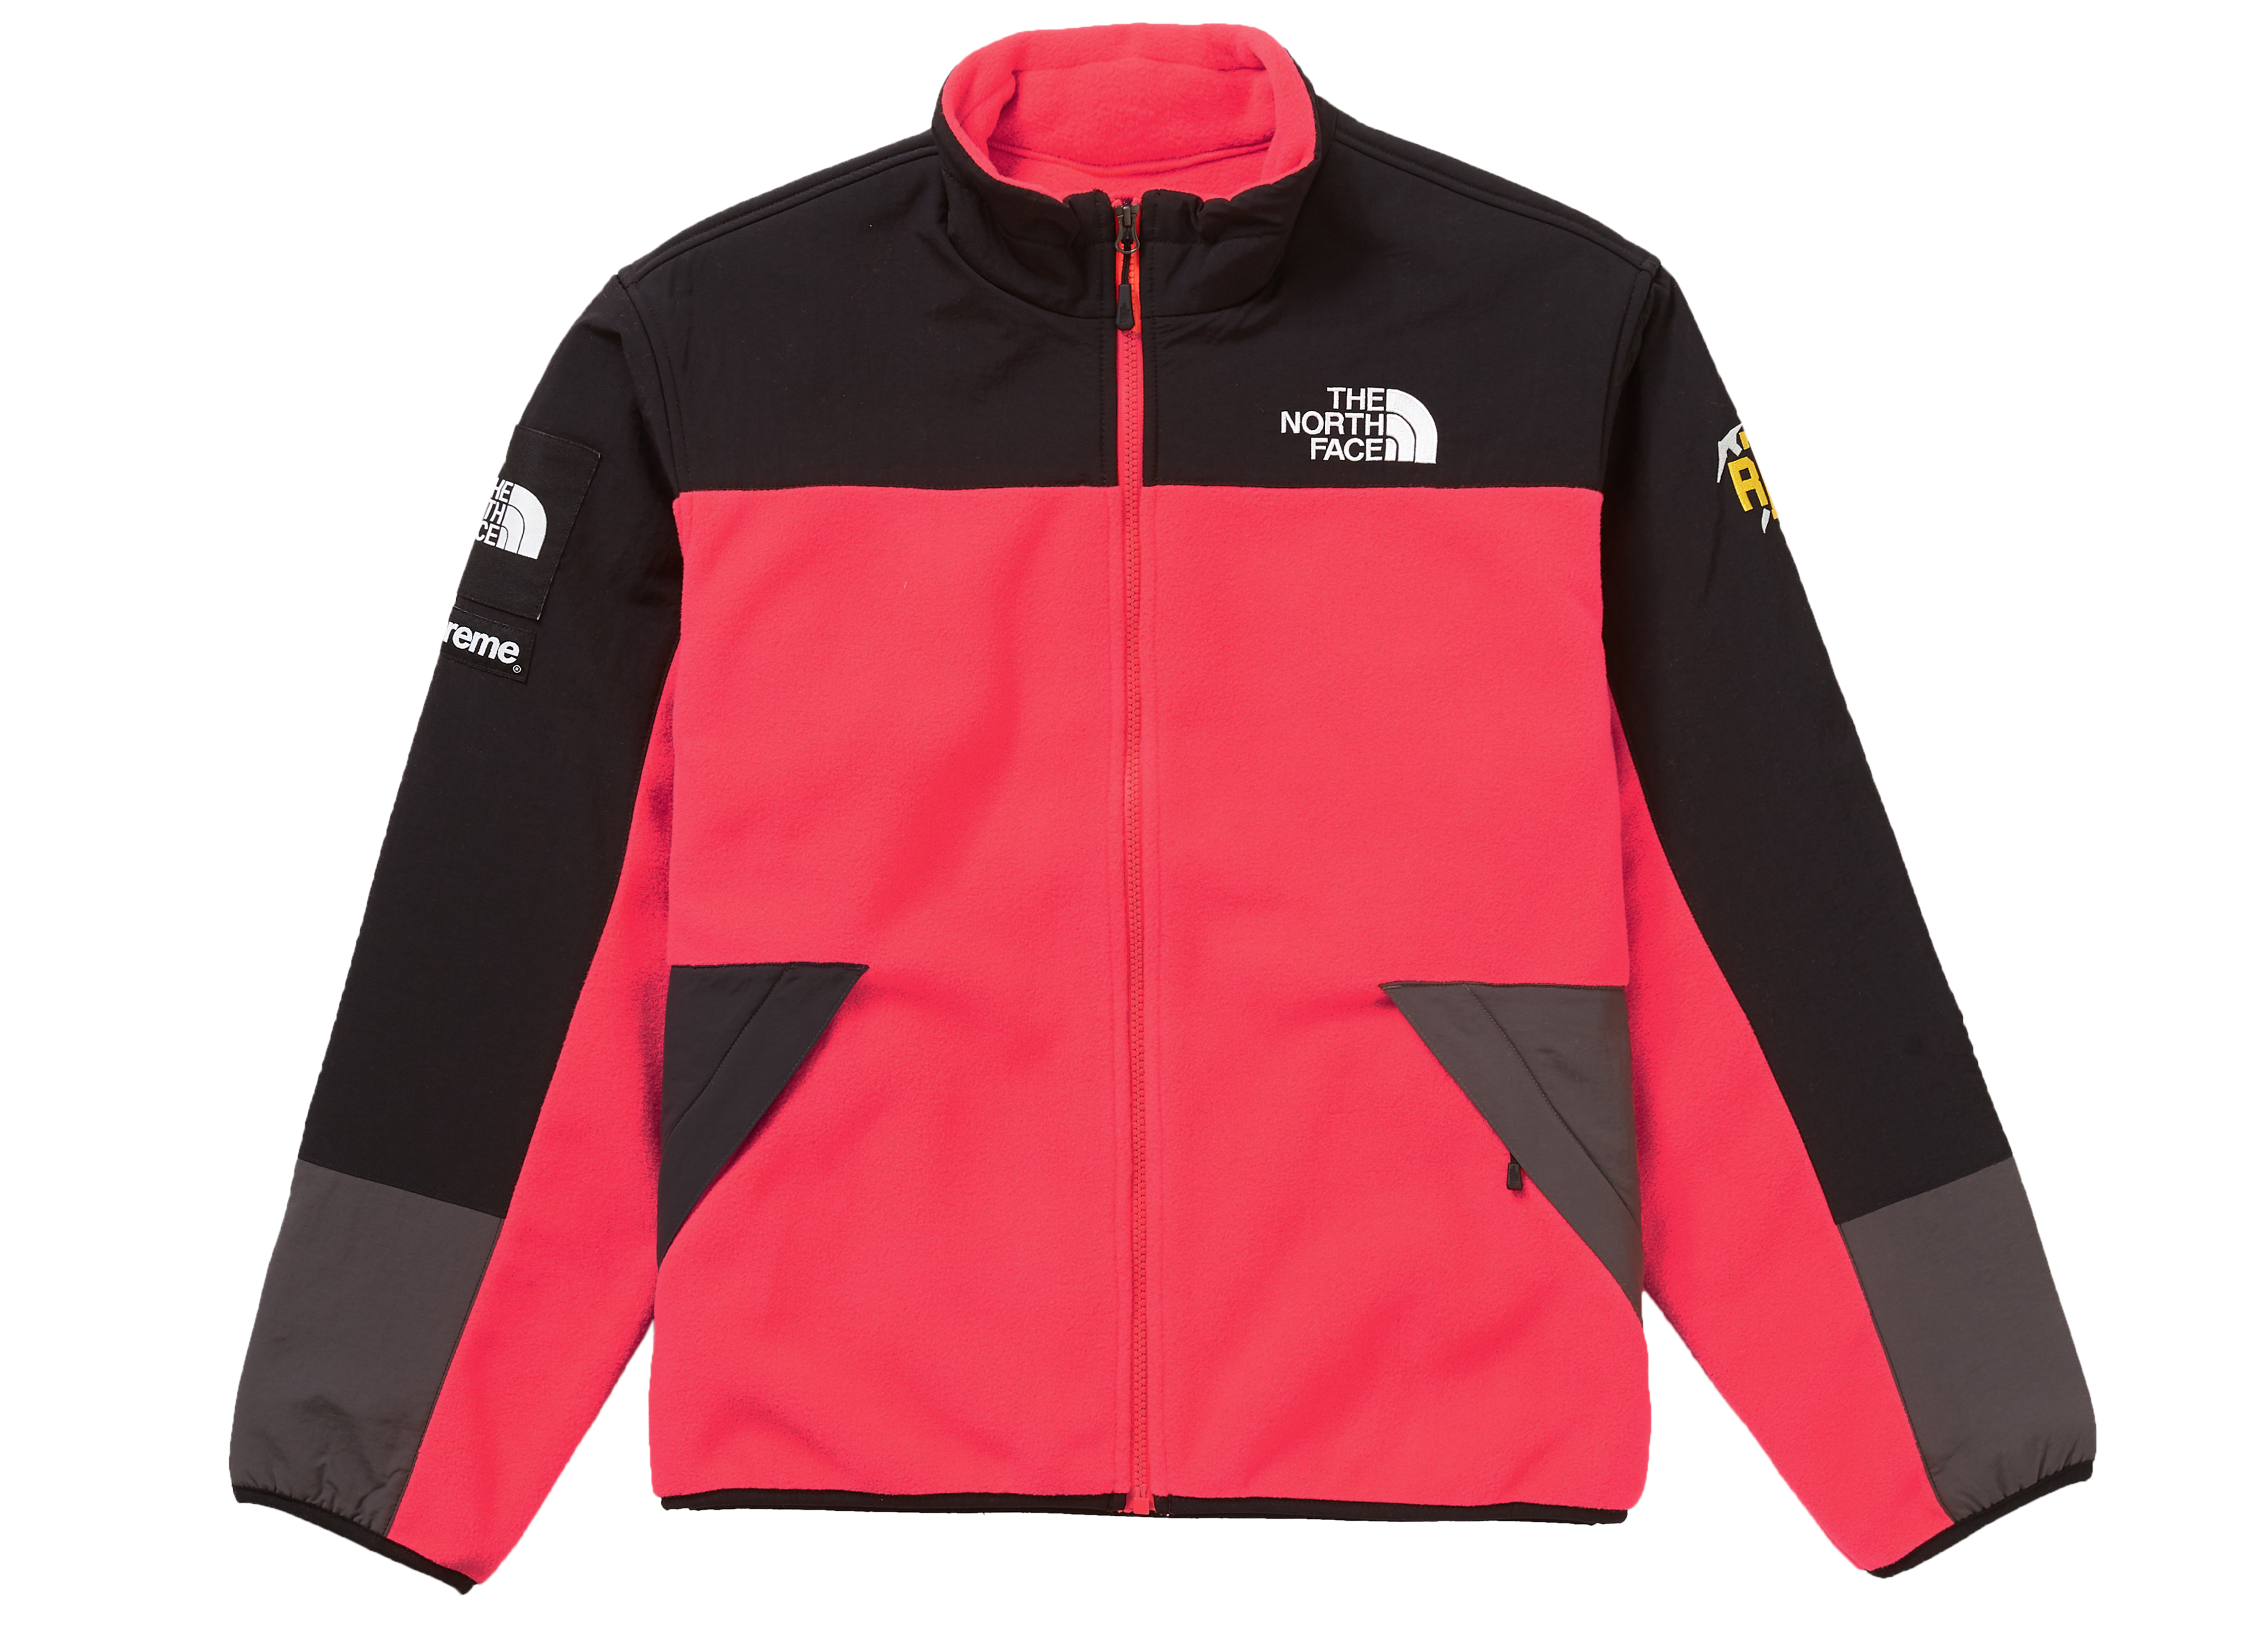 The Best The North Face Collaborations for Spring - StockX News